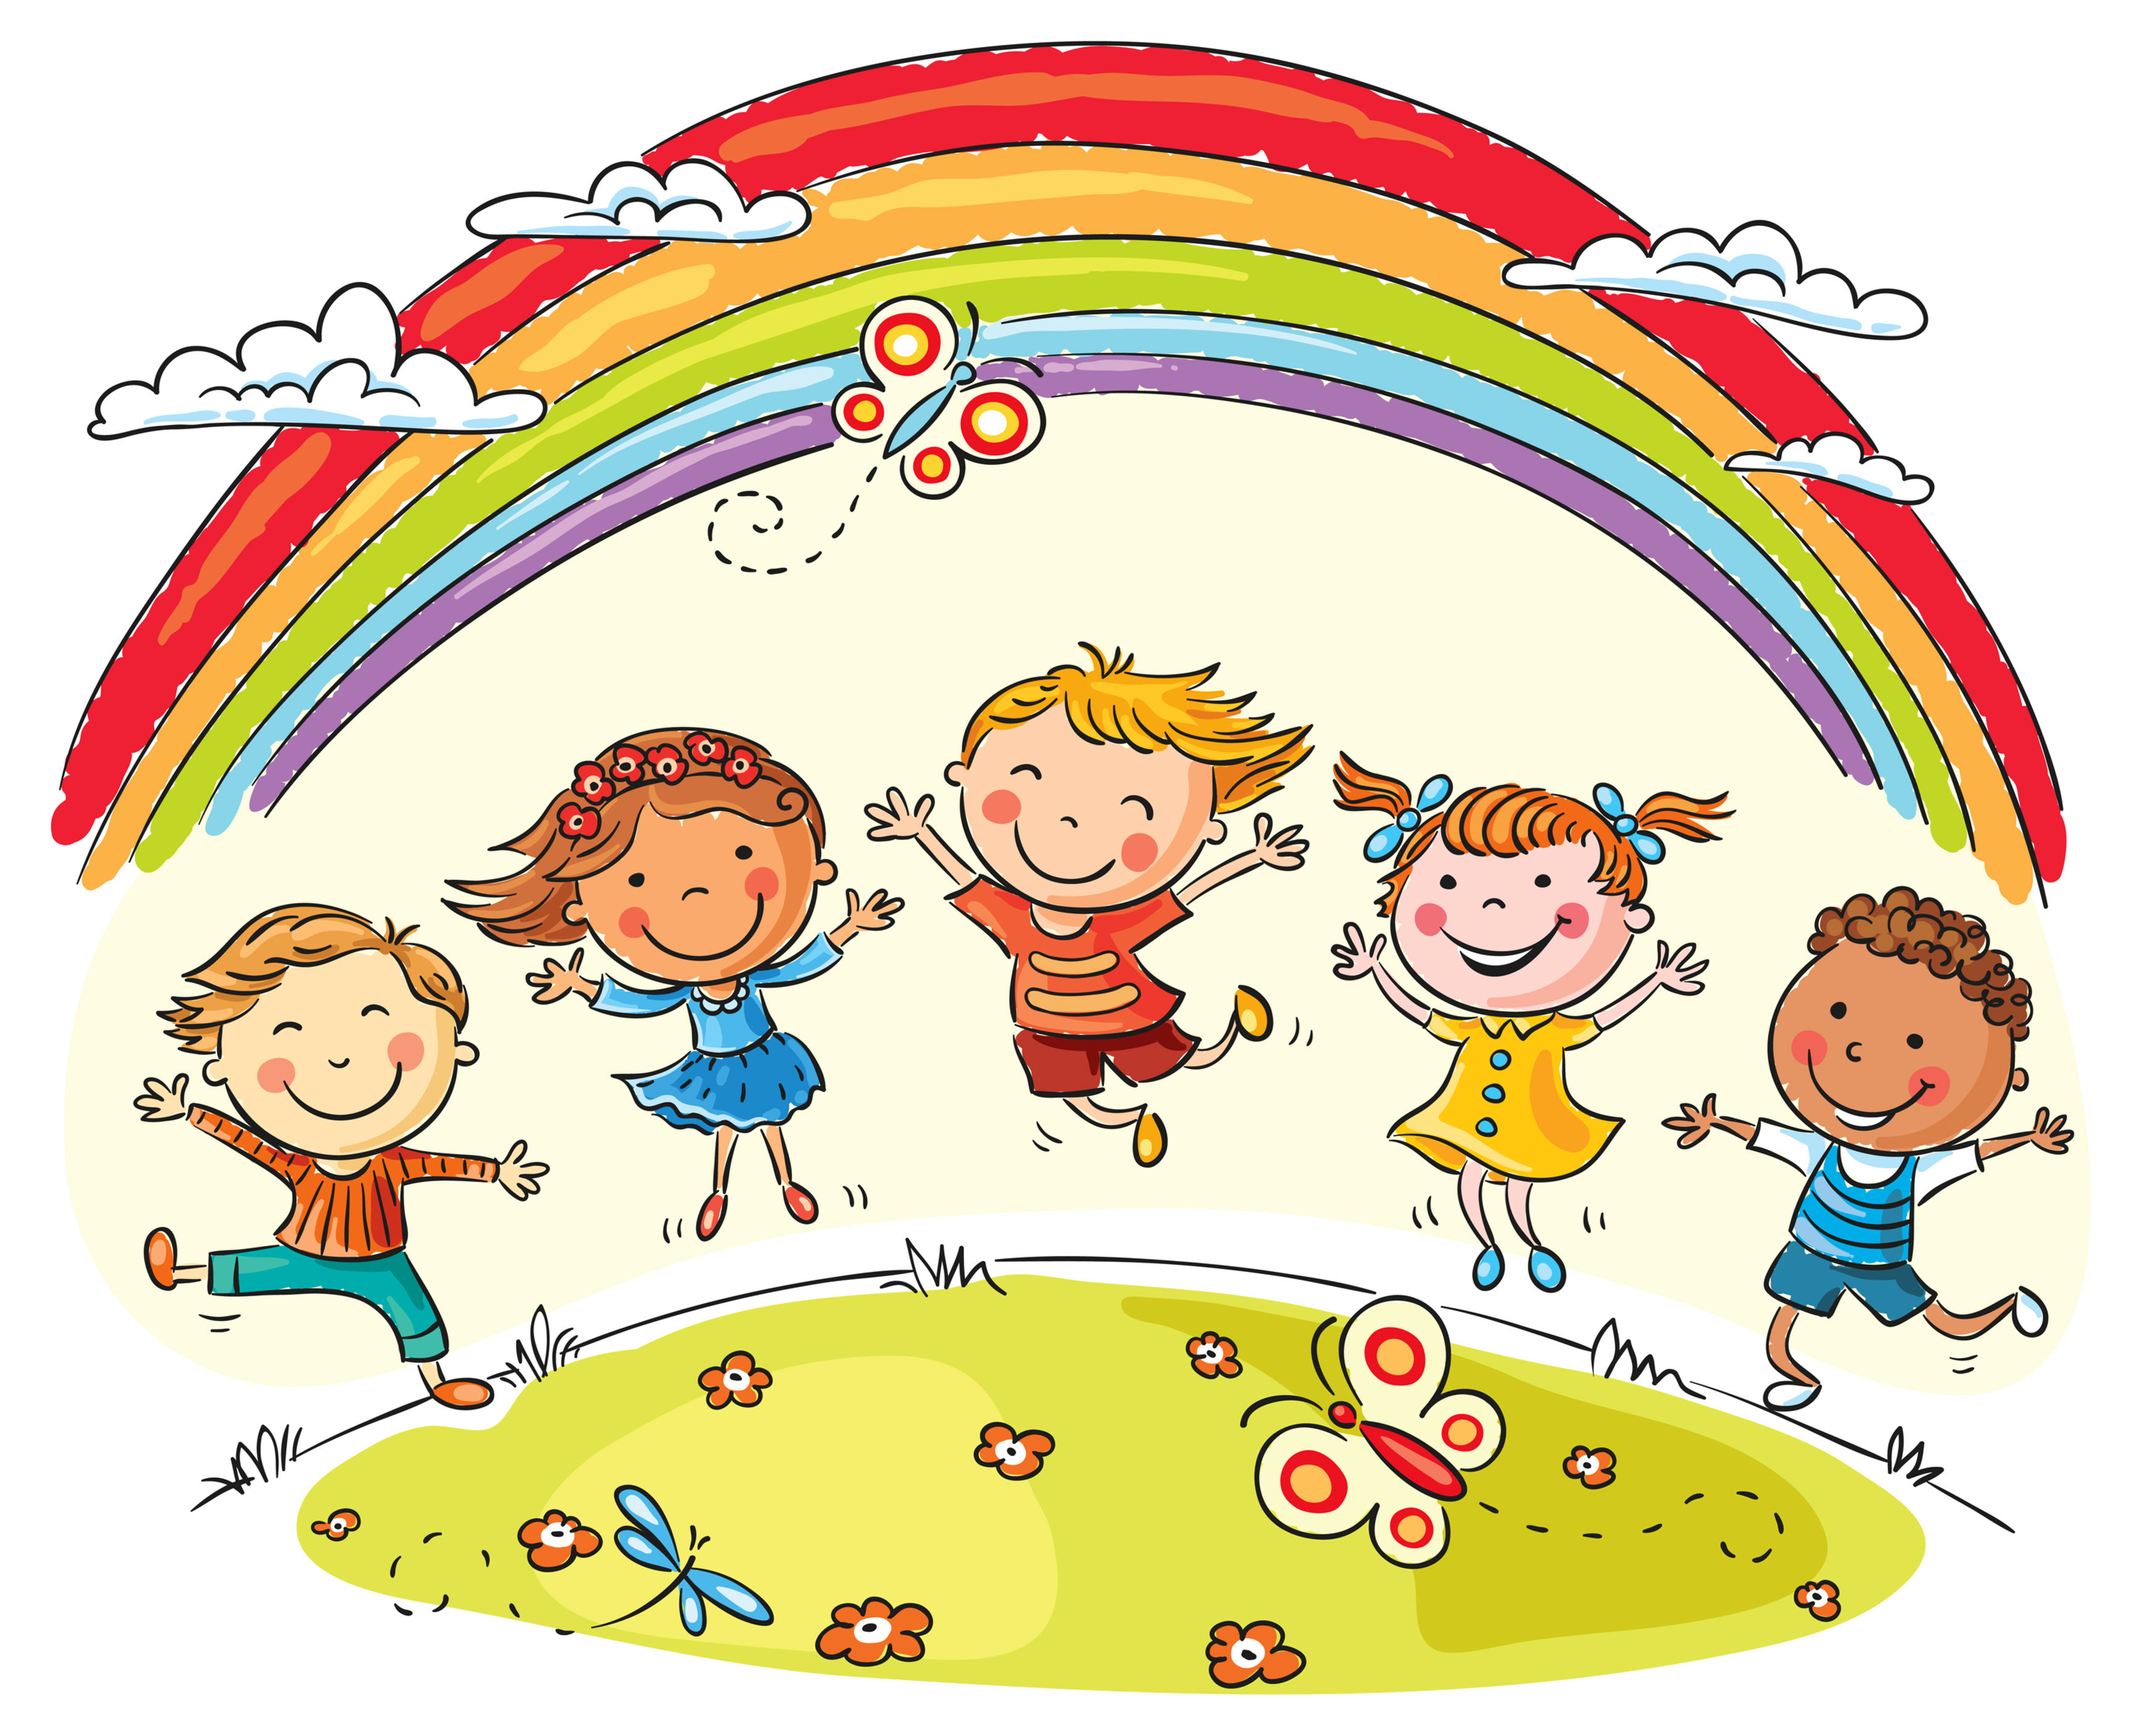 35233096 - kids jumping with joy on a hill under rainbow, colorful cartoon